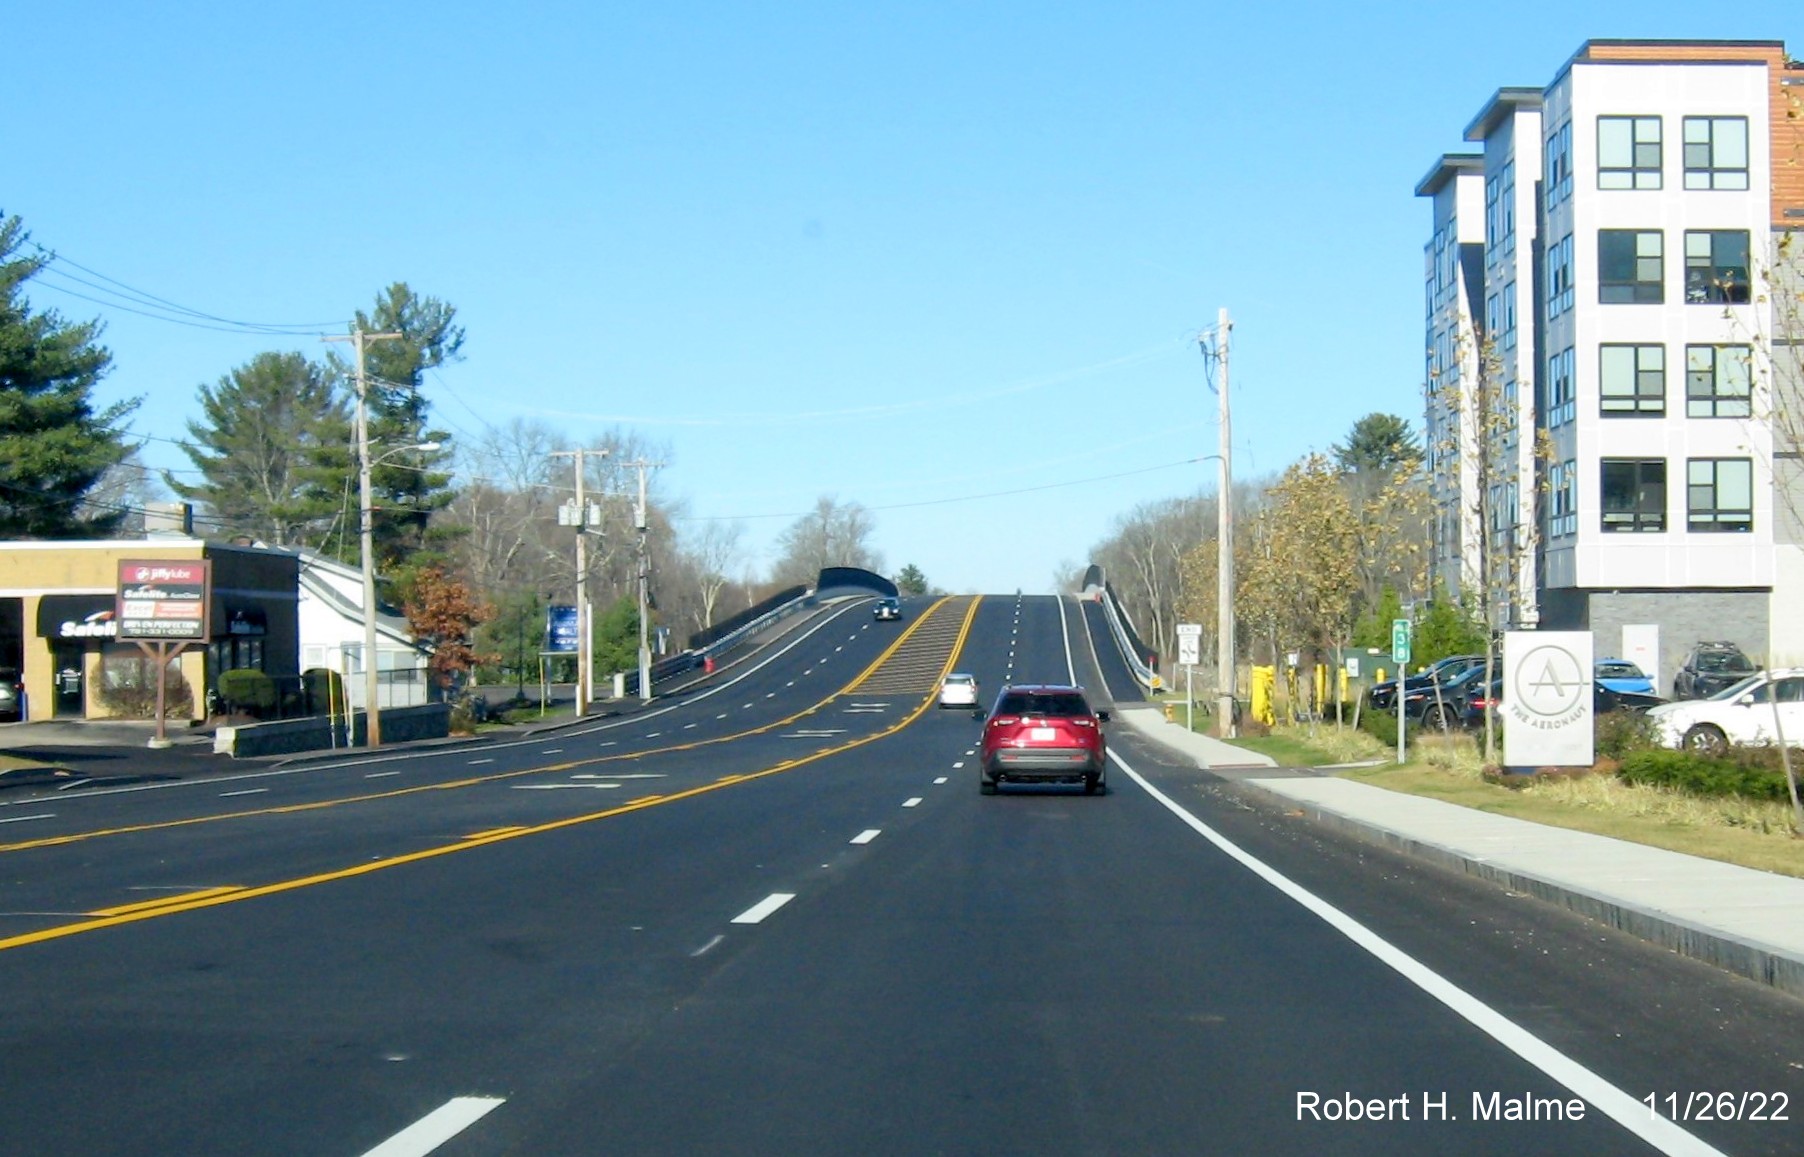 Image of MA 18 traffic approaching completed commuter railroad bridge in South Weymouth, November 2022